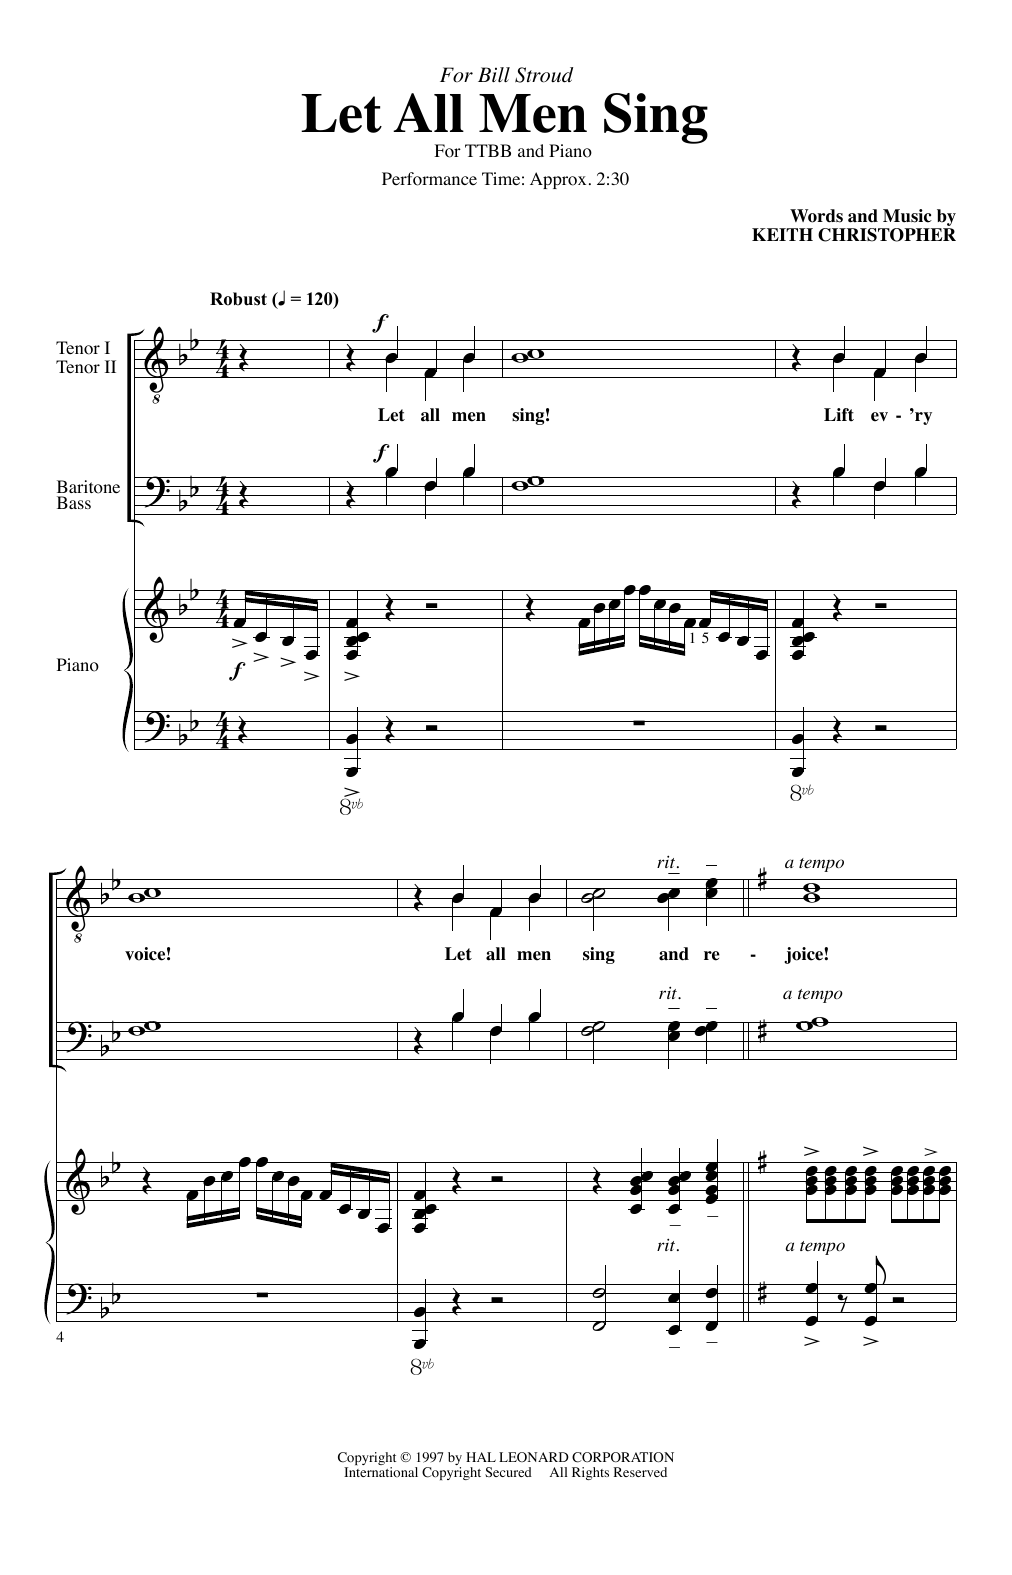 Download Keith Christopher Let All Men Sing Sheet Music